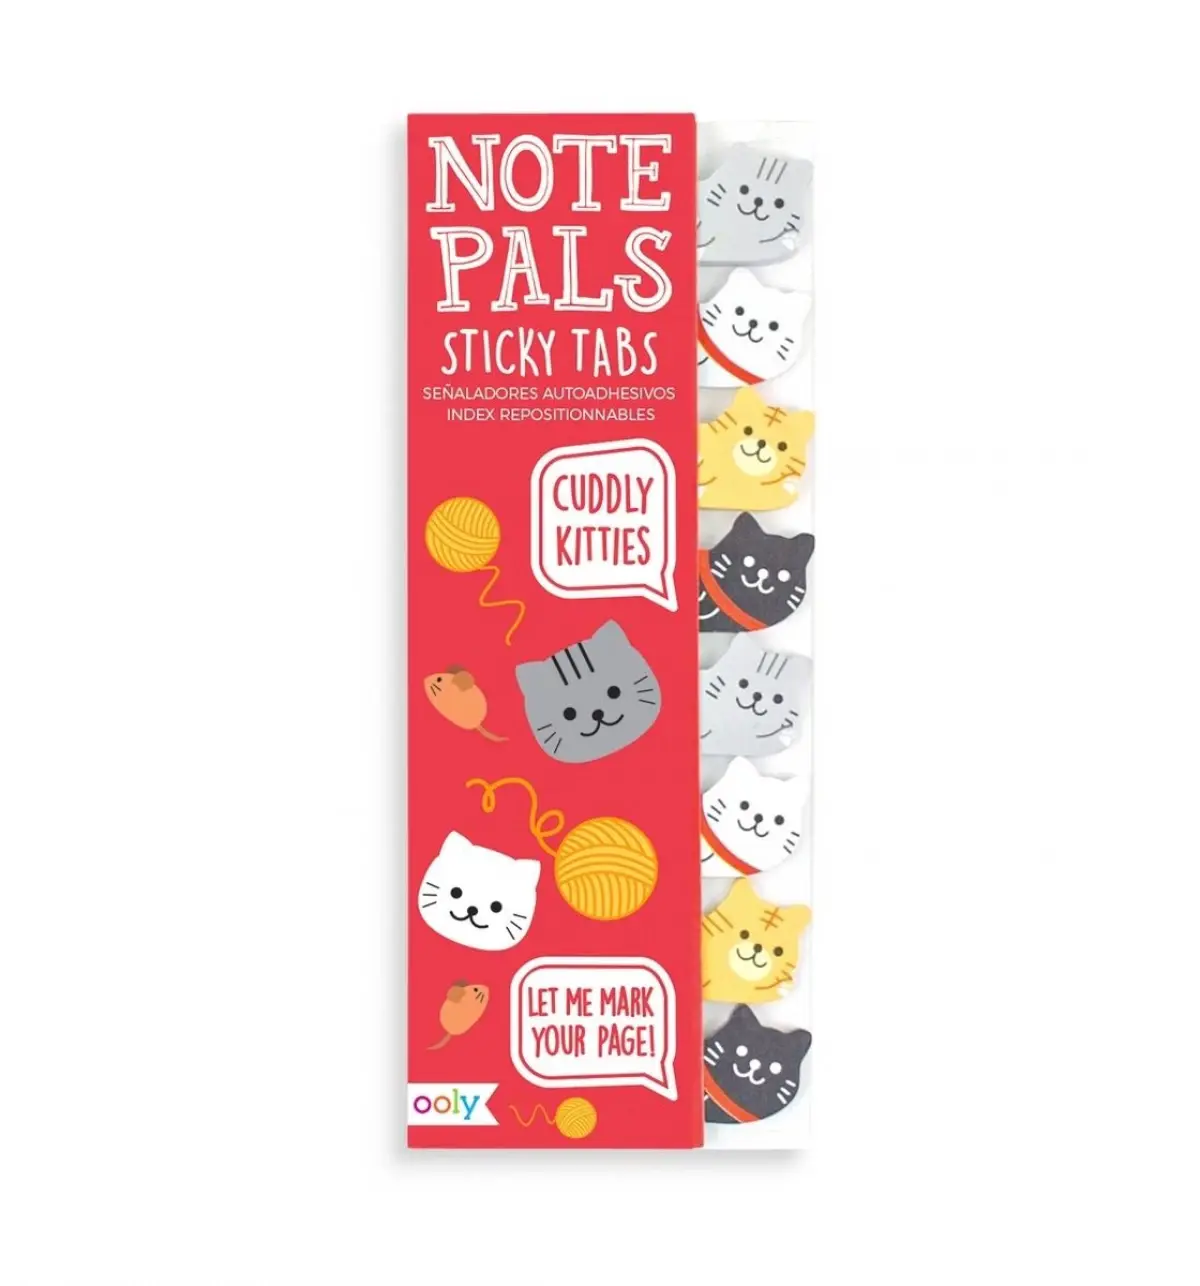 OOLY Note pals sticky tabs Cuddly Kitties Red 6Y+